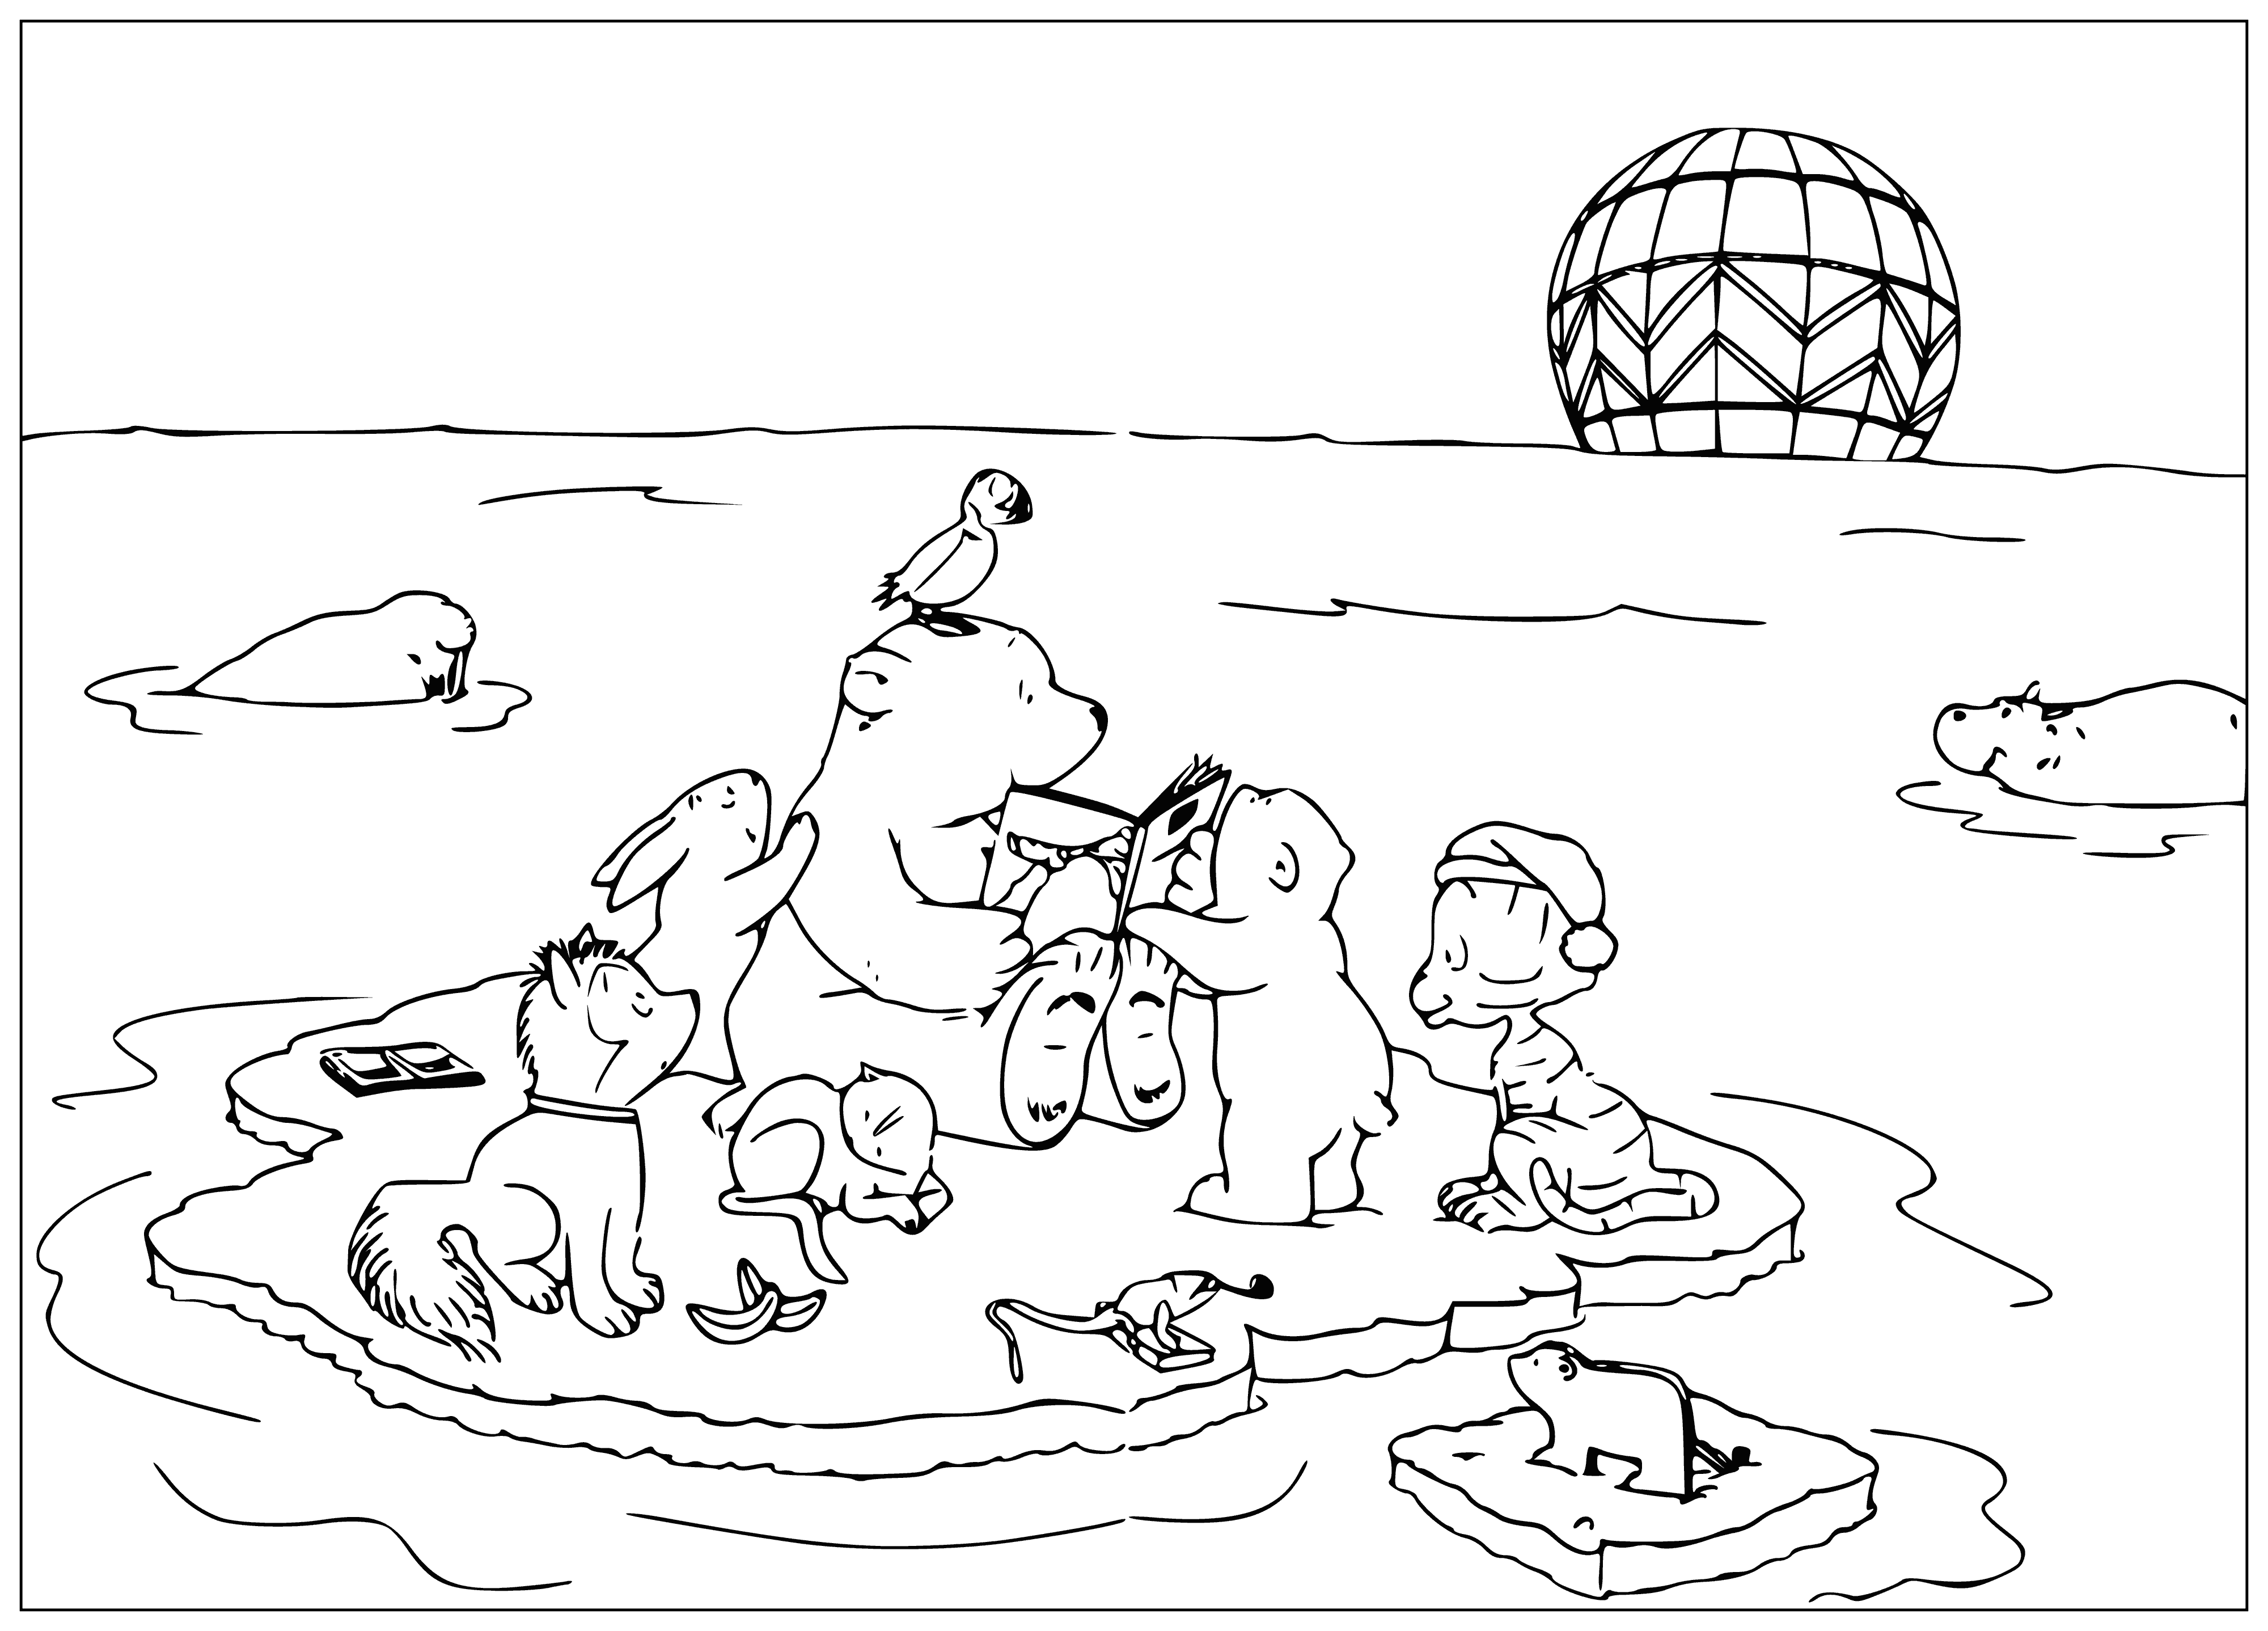 Friends on the ice coloring page